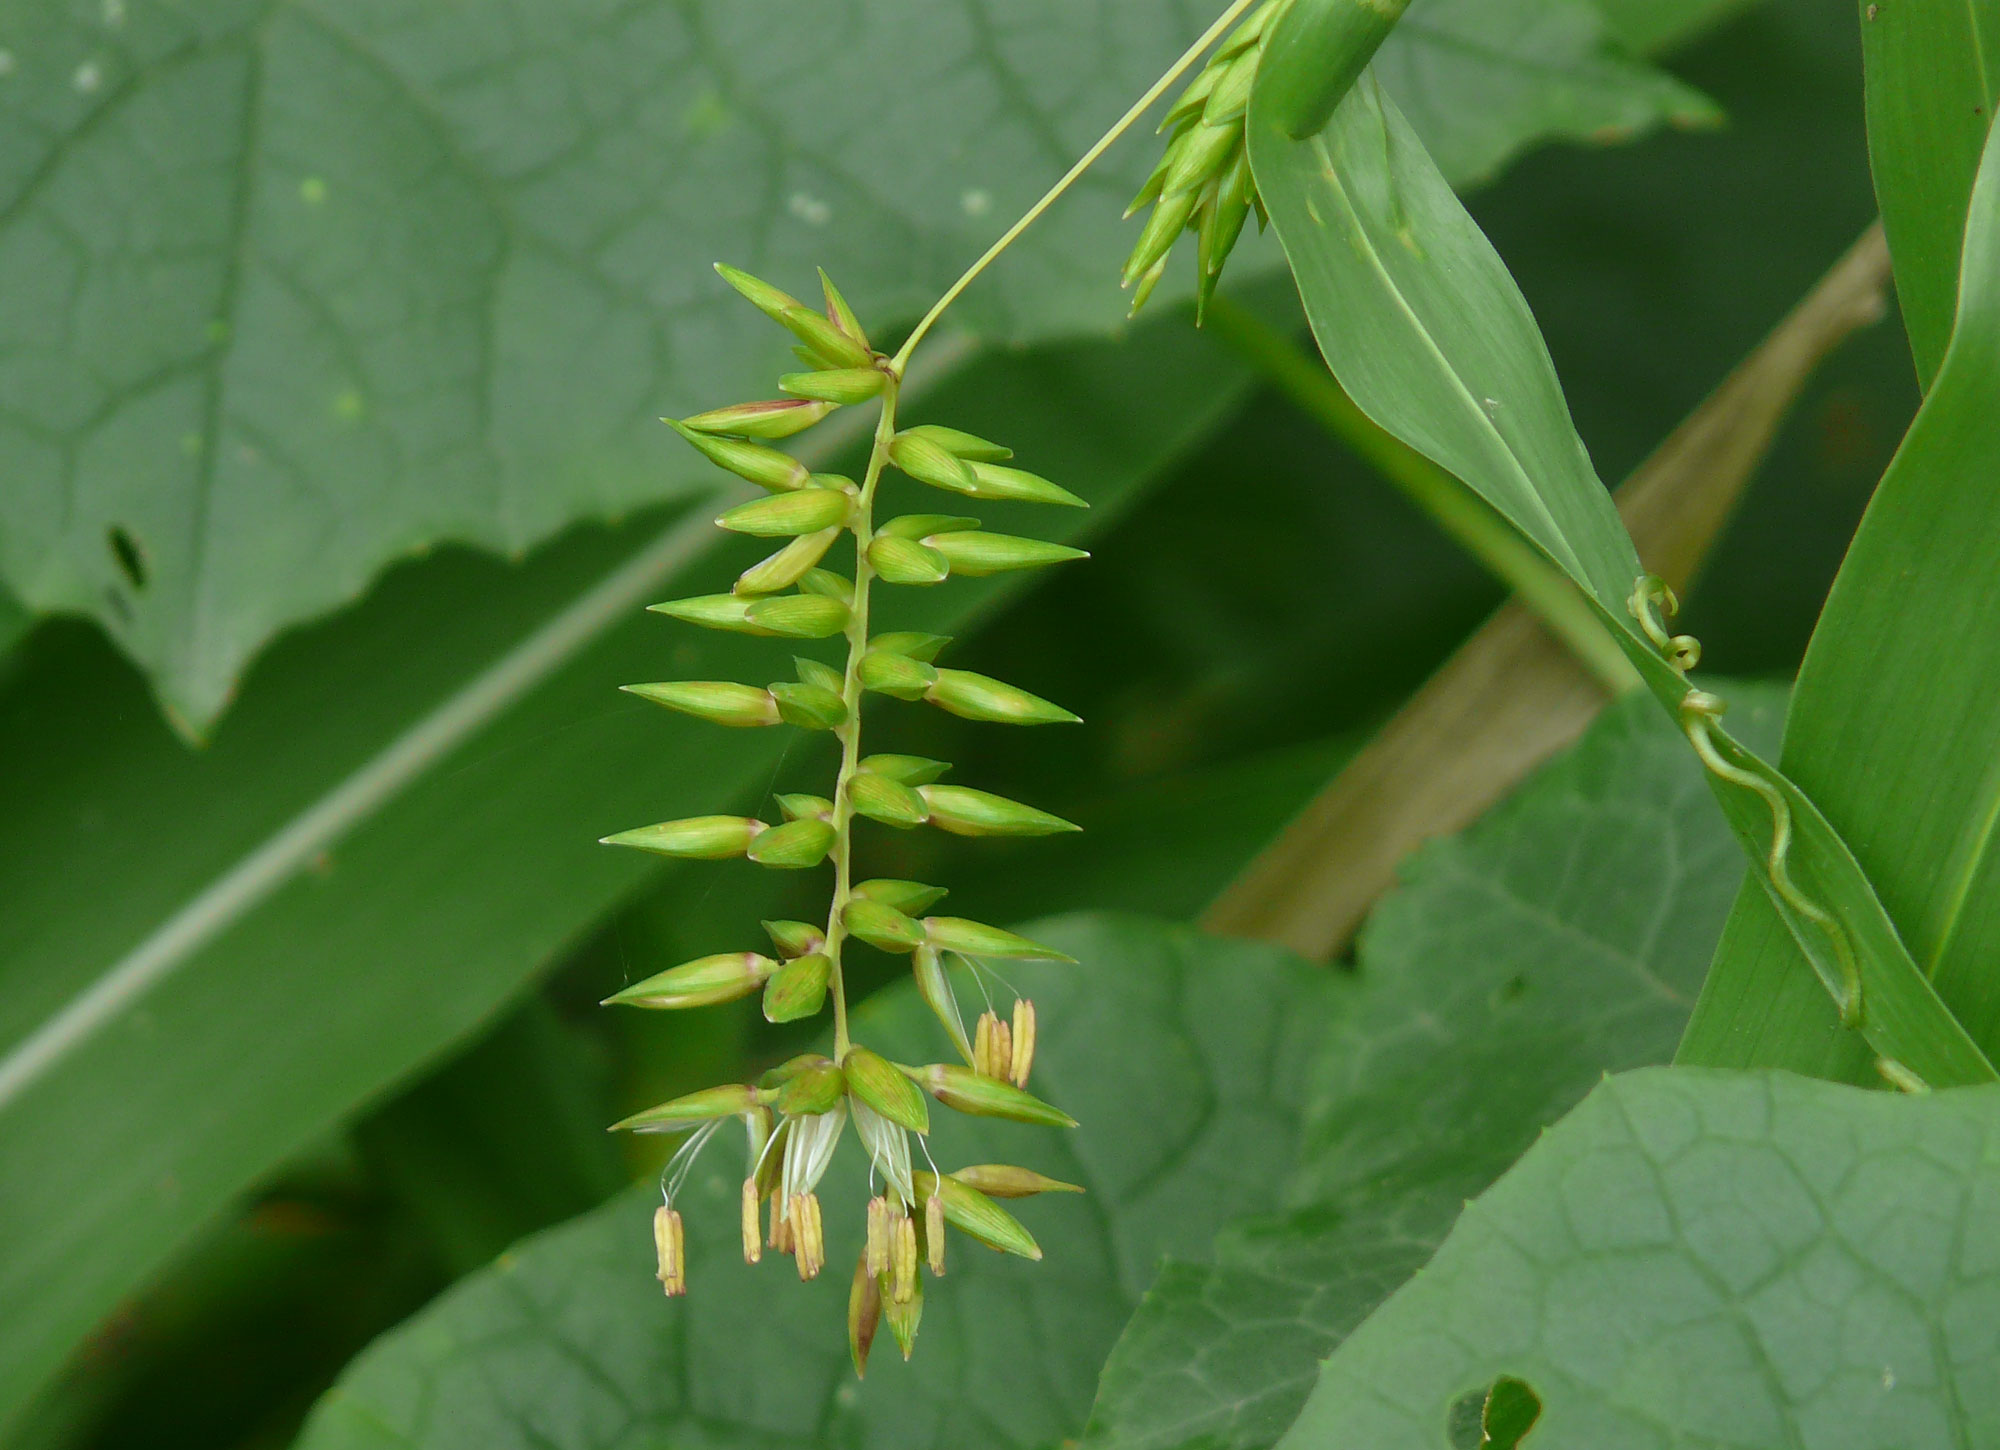 Photograph of an inflorescence of Job's tears. The photo shows a delicate inflorescence hanging vertically, The spikelets at the tip of the inflorescence (bottom of the image) are open, and light yellow anthers are protruding from them. The spikelets near the base of the inflorescence are closed.